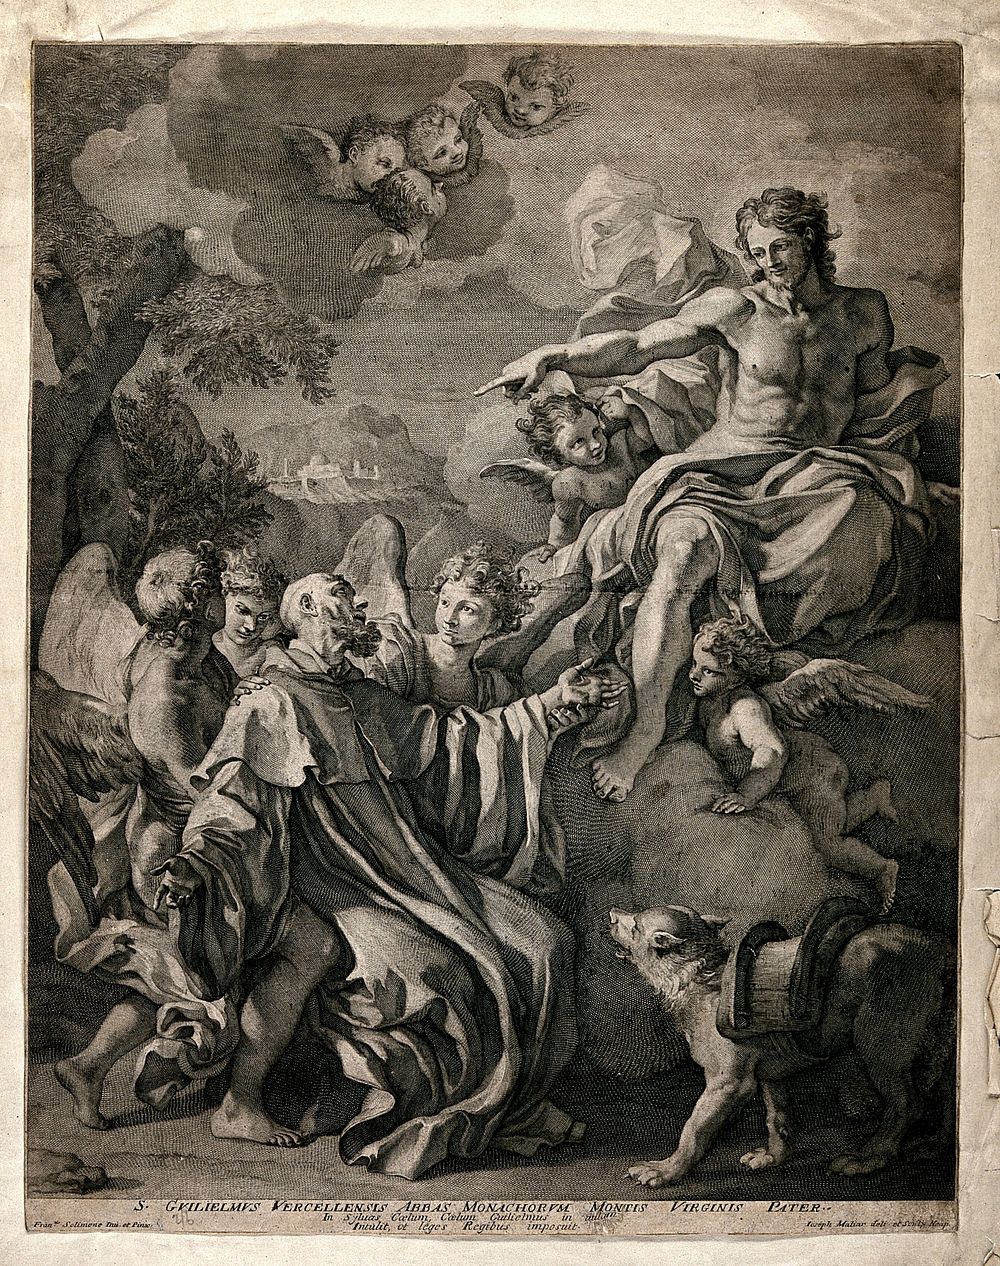 The ecstasy of Saint William of Vercelli. Engraving by Giuseppe Magliar after F. Solimena.